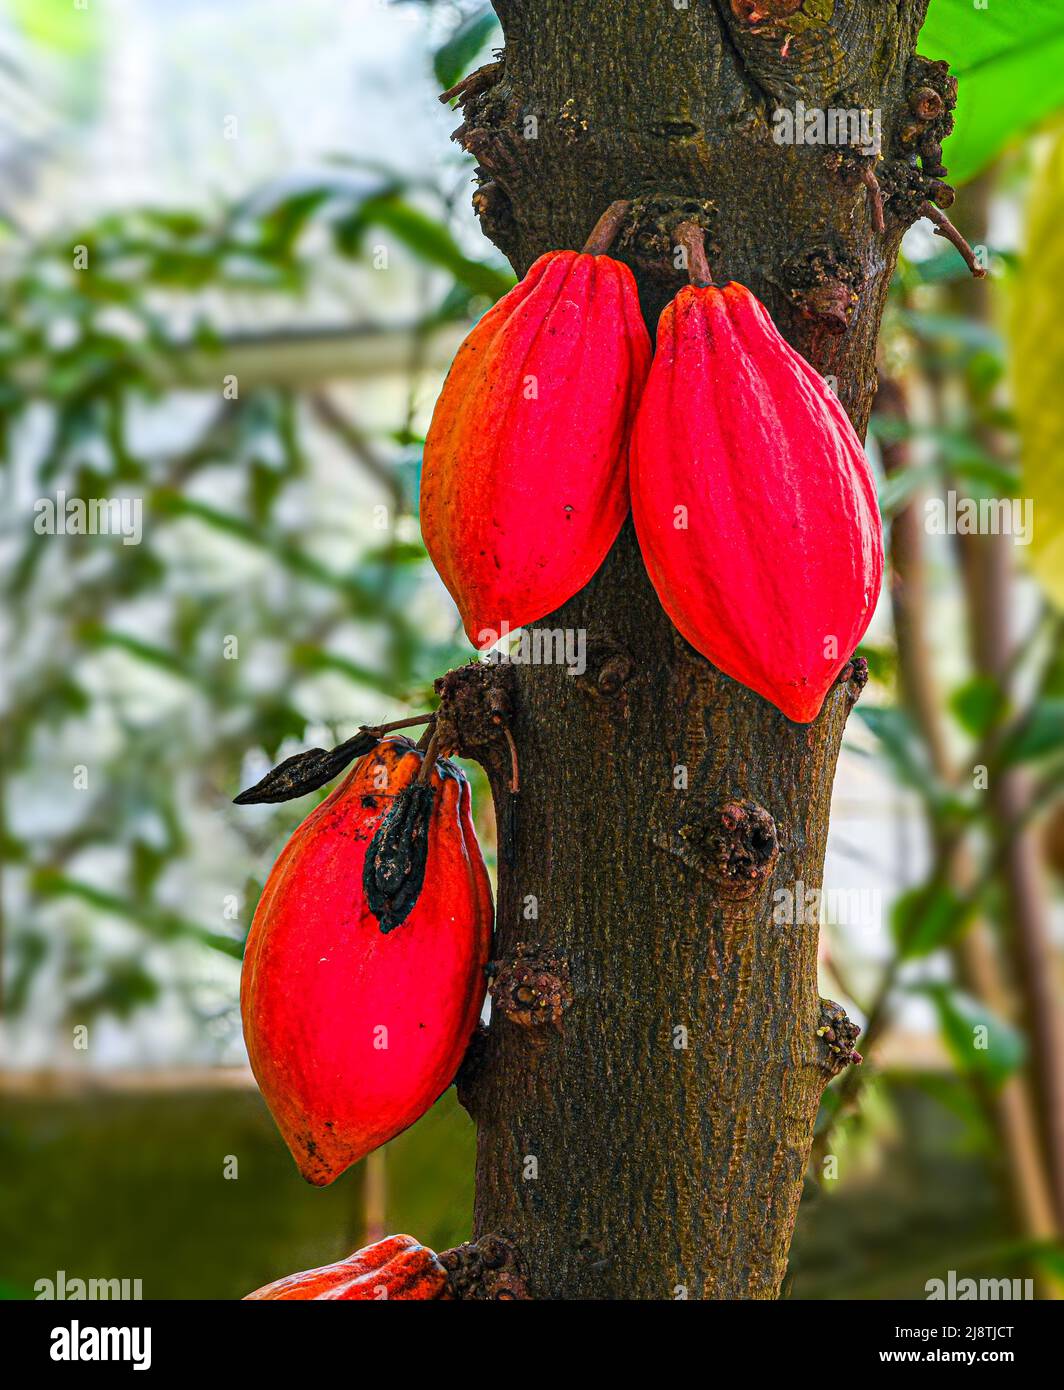 Cacao tree or cocoa tree (Theobroma cacao) is an evergreen tree native to tropical America. Stock Photo